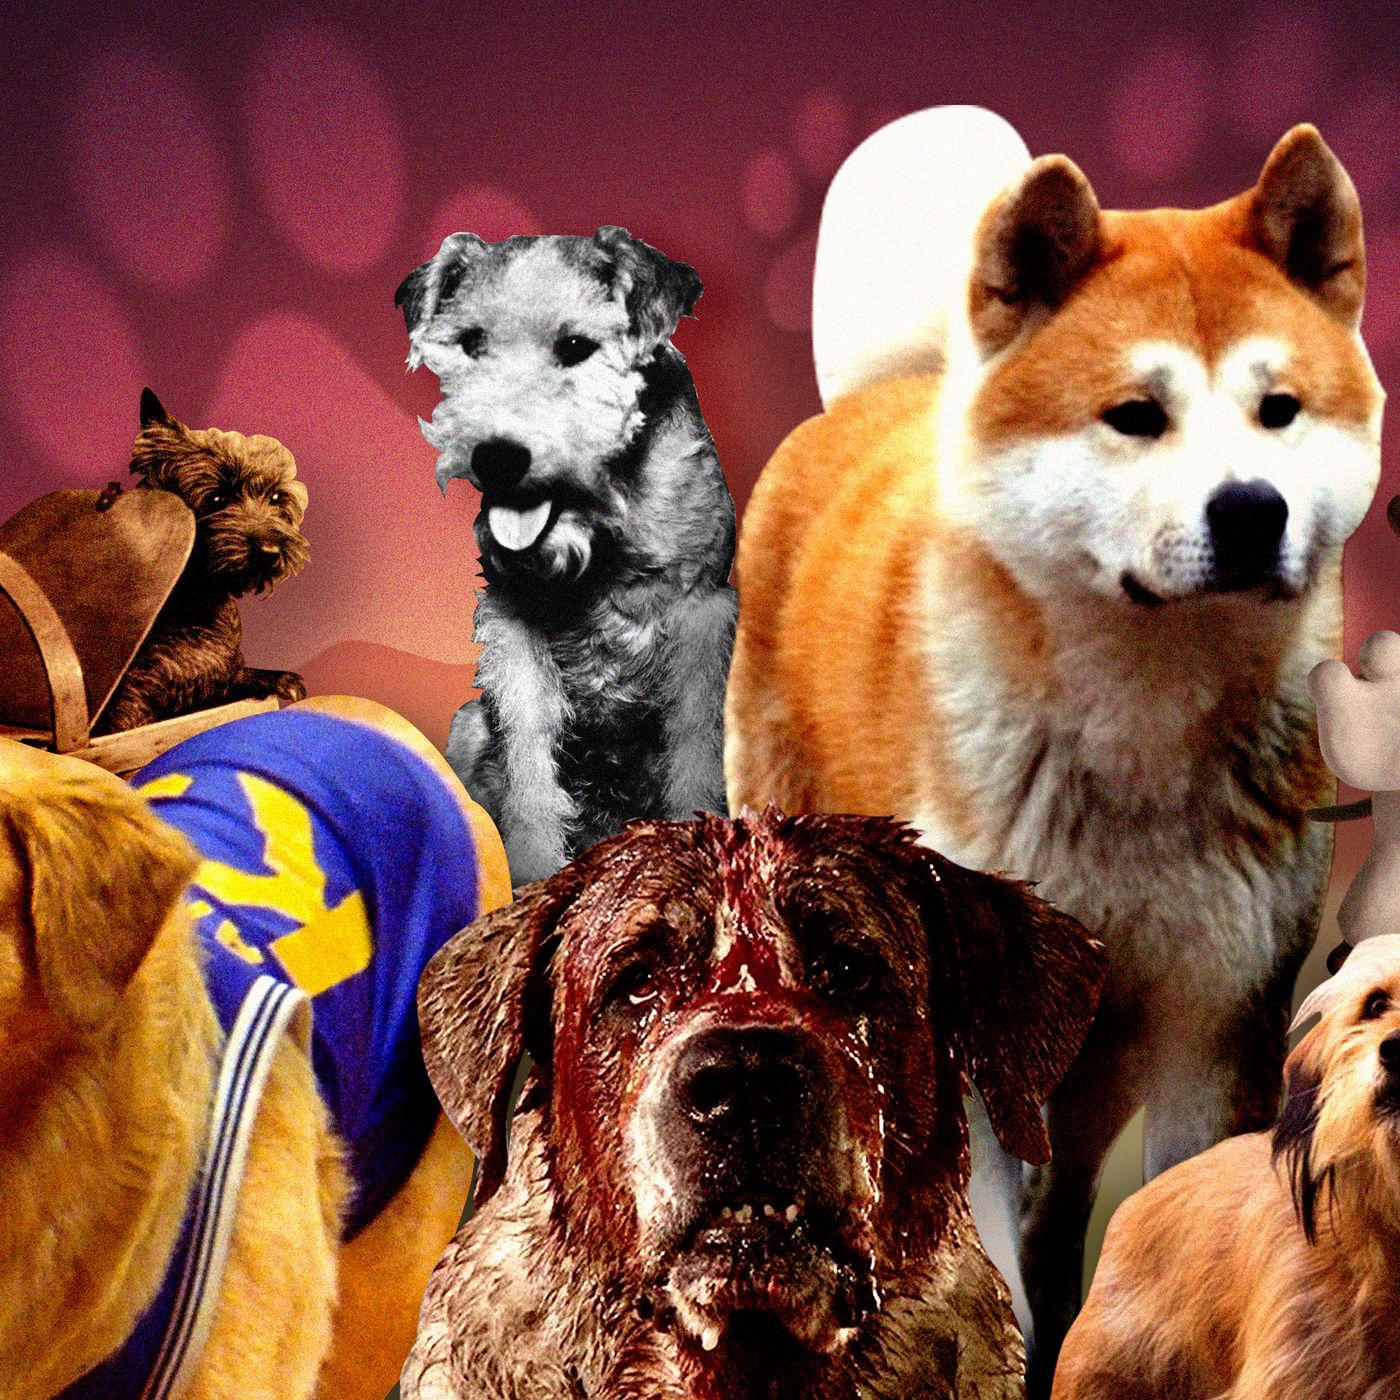 The 25 Best Dogs in Movies pic